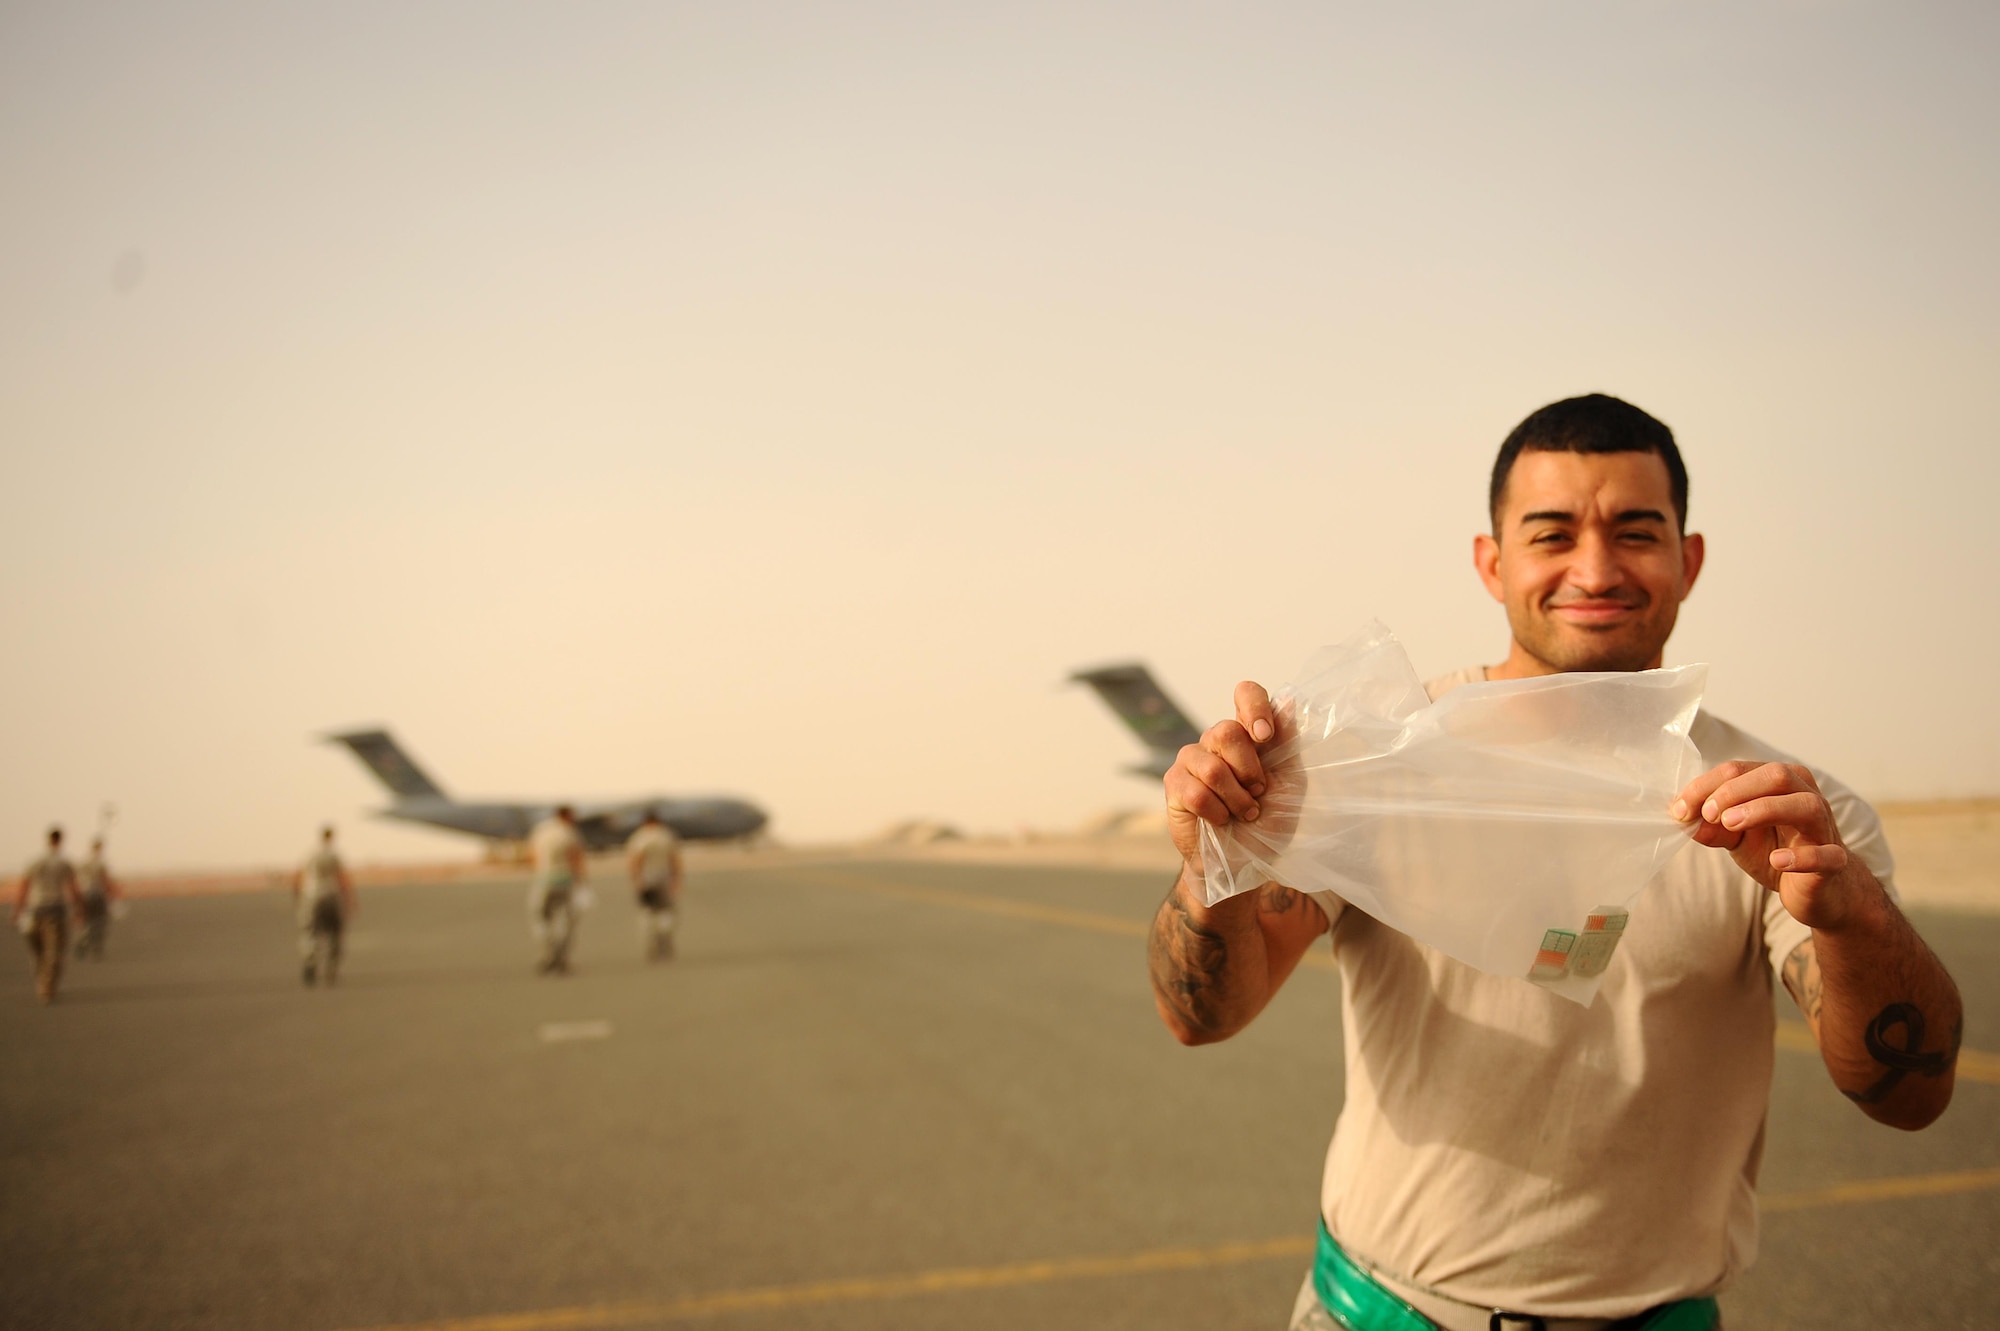 A U.S. Airman displays his bag of “FOD” or Foreign Object Debris during a clean-up of the flightline at an undisclosed location in Southwest Asia, May 15, 2015. Airmen routinely clear any trash or objects from the flightline which could cause engine or structural damage to aircraft.  (U.S. Air Force photo/Tech. Sgt. Brittany E. Jones)